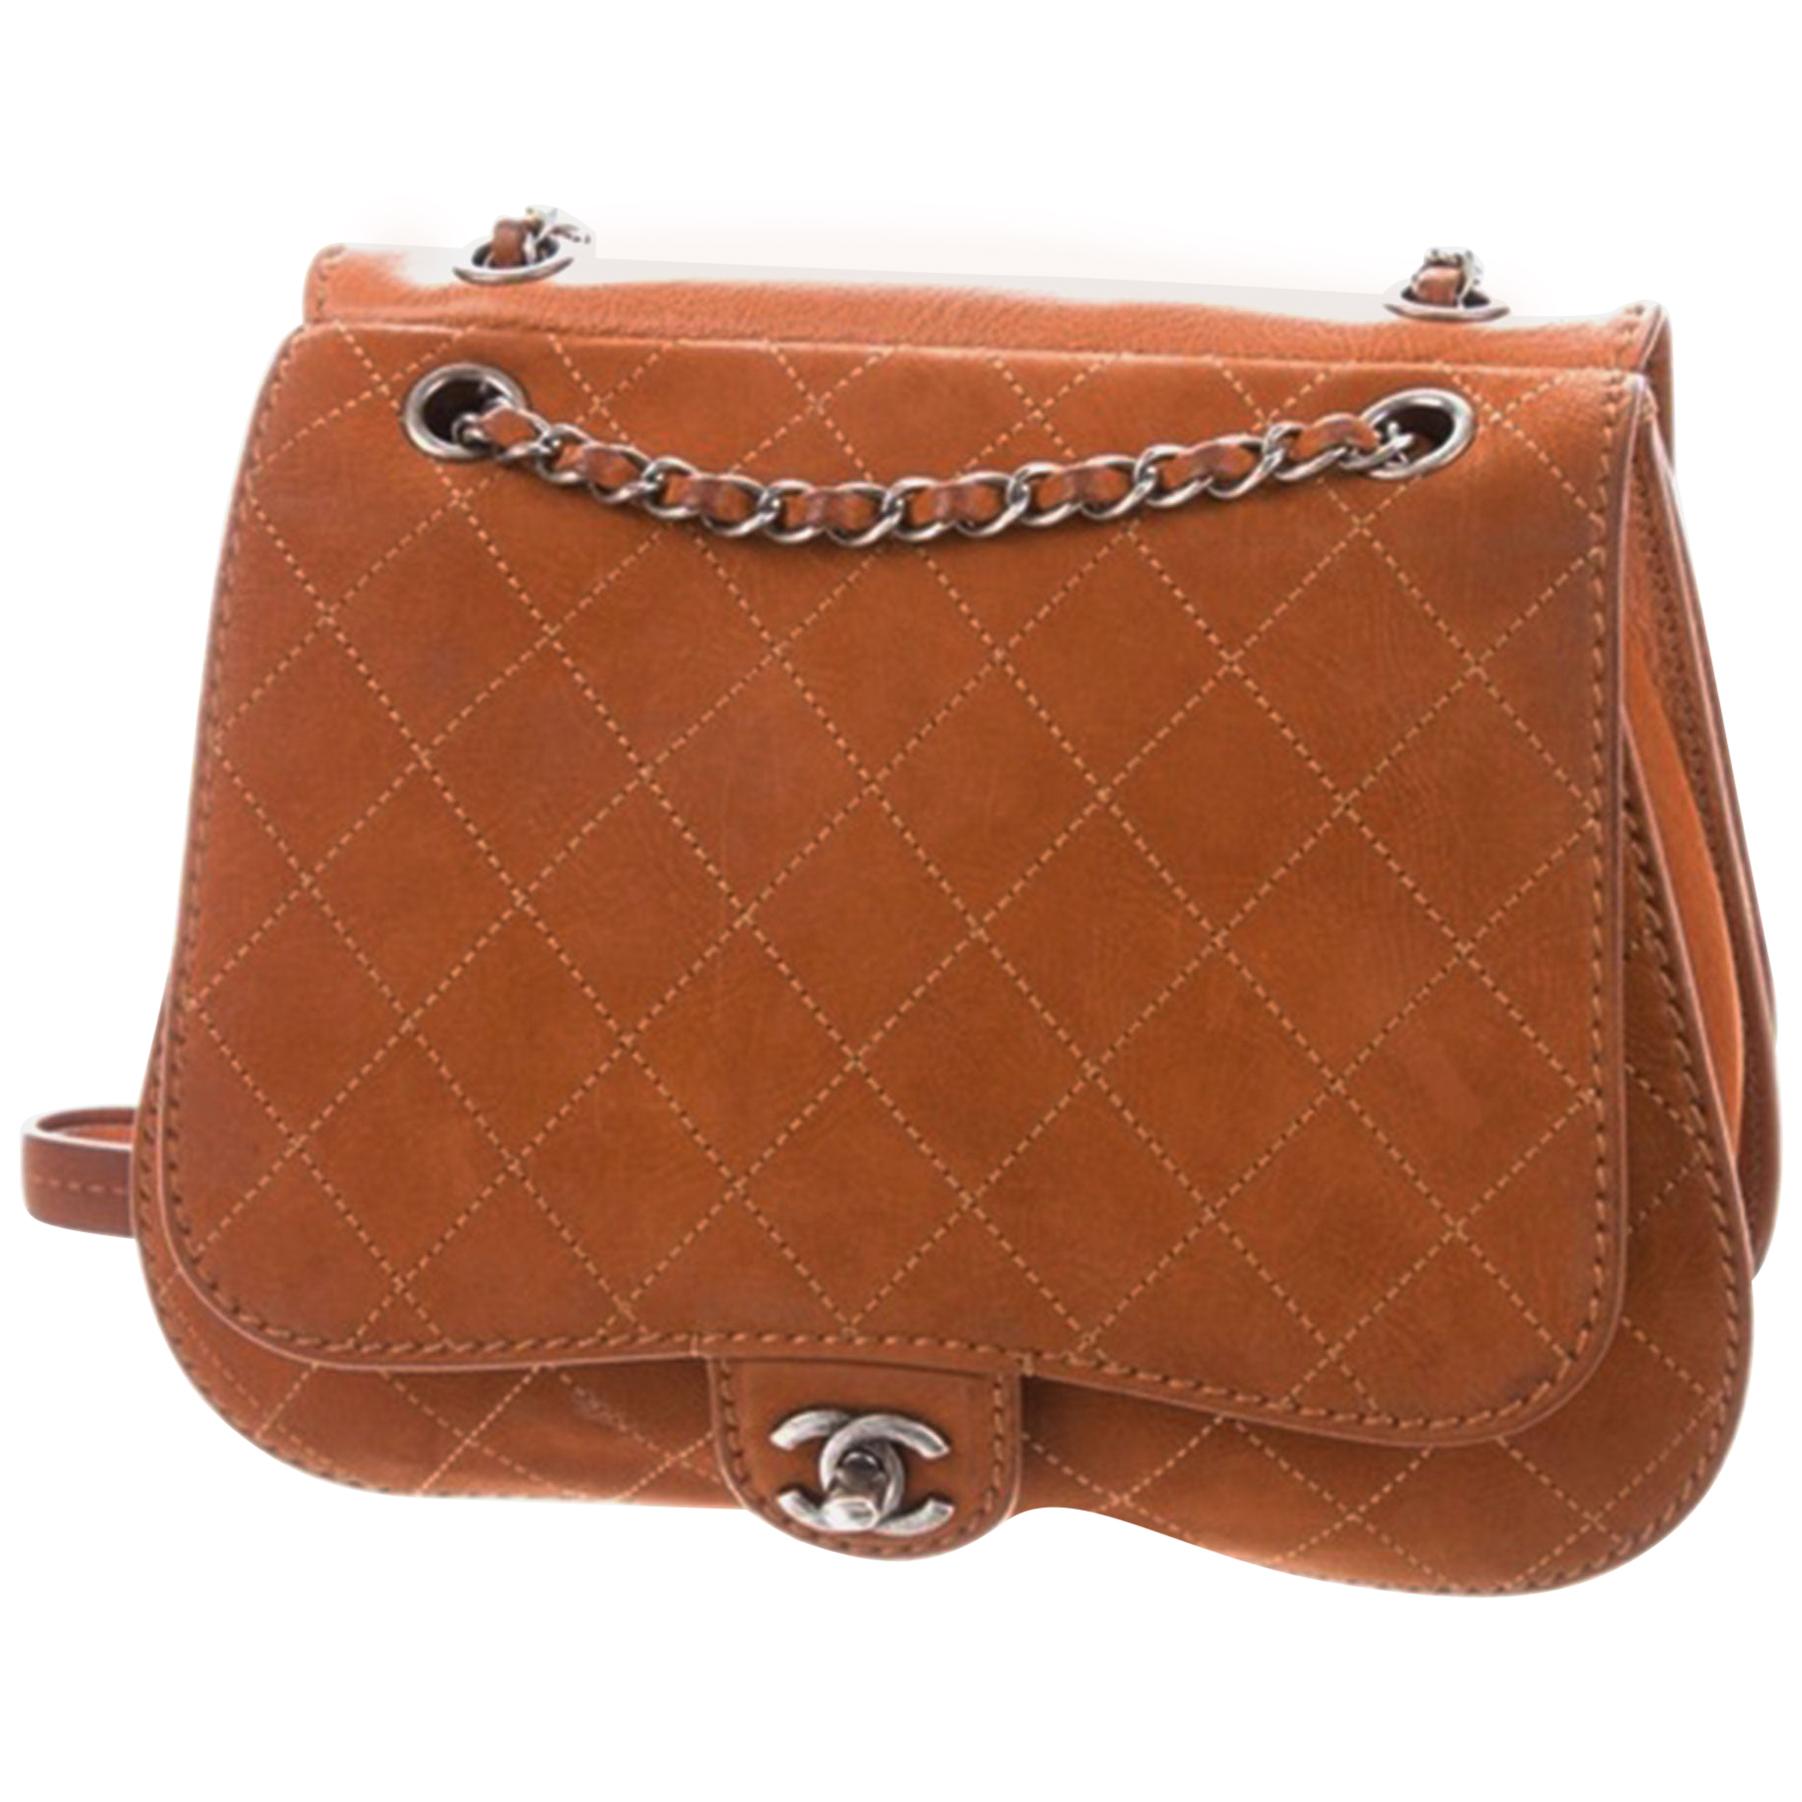 Chanel Classic Flap Large Jumbo Quilted Saddle Brown Nubuck Leather Bag